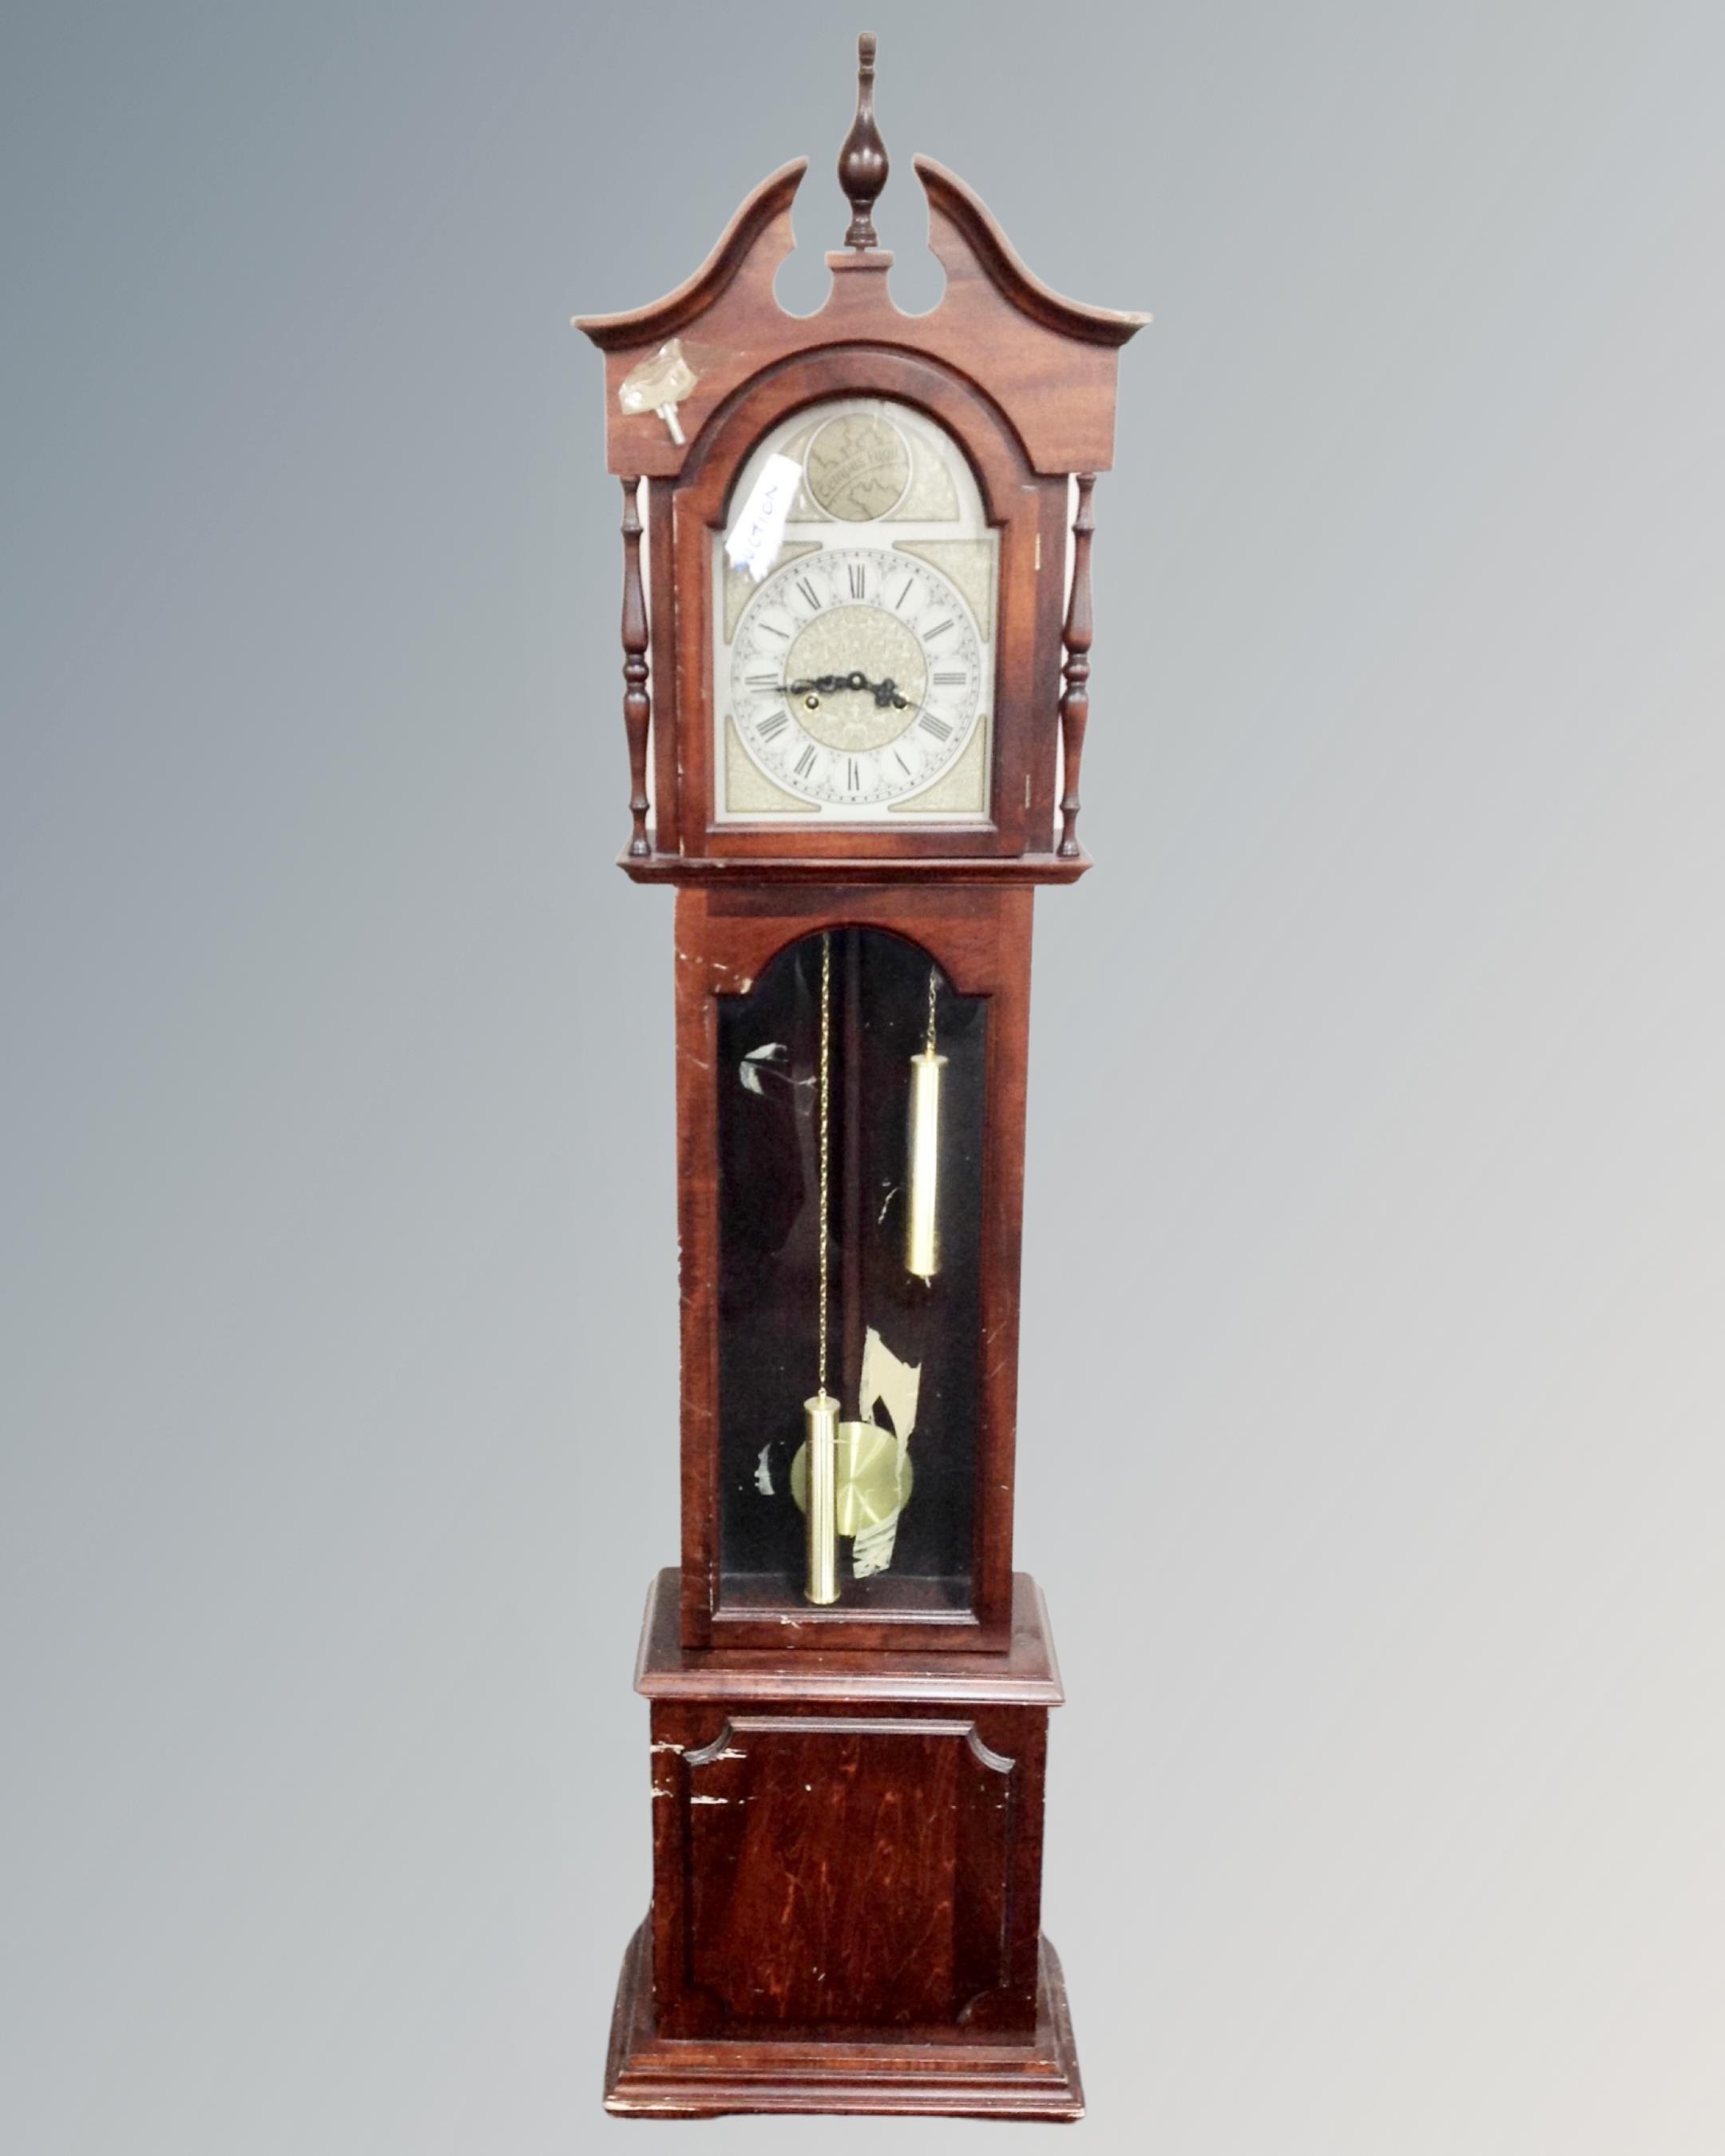 A Tempus Fugit granddaughter clock with pendulum key and weights.